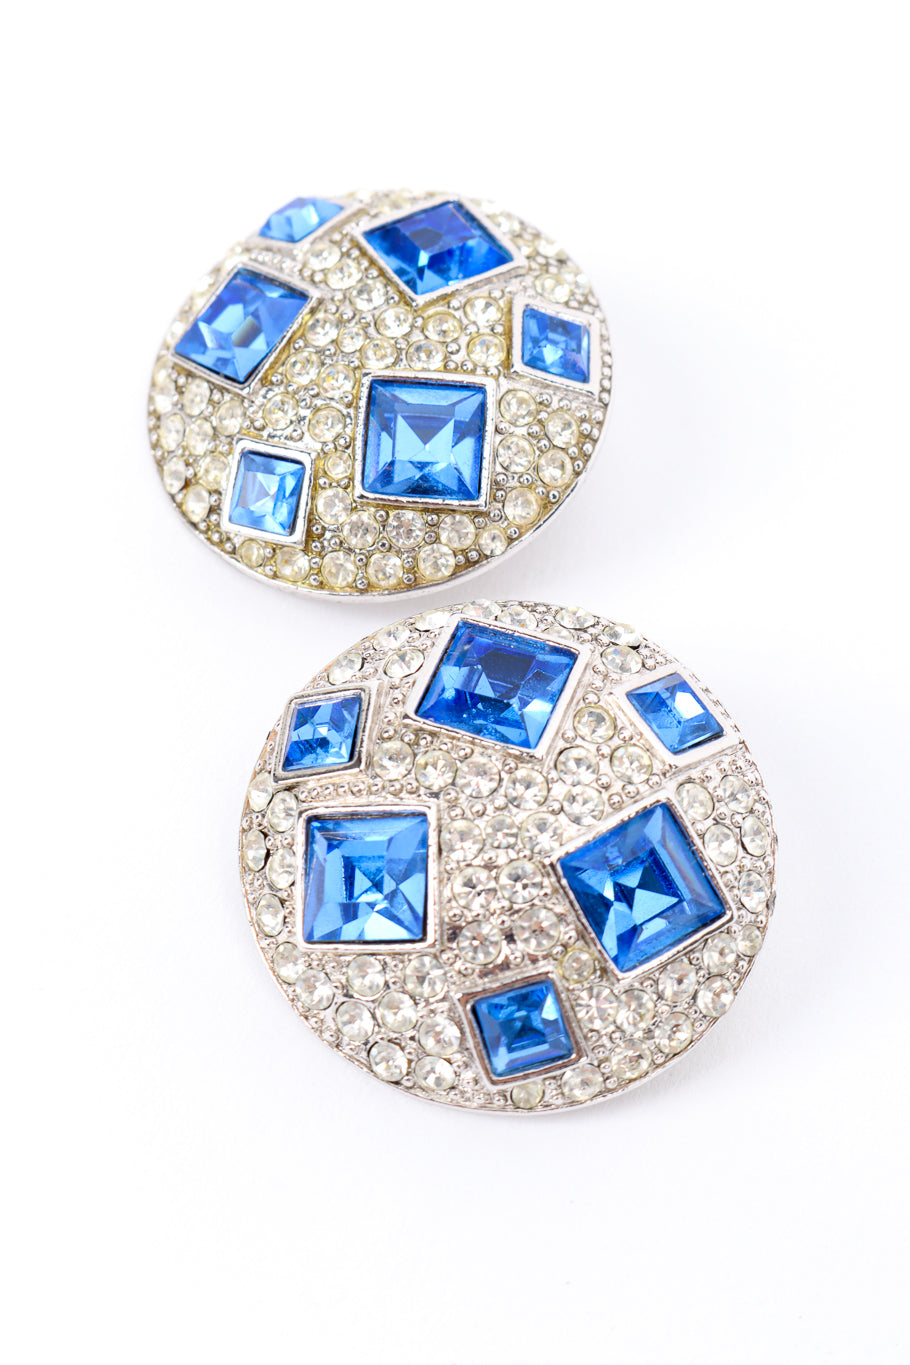 Vintage YSL Crystal Gem Button Earrings front closeup of tarnish @recess la